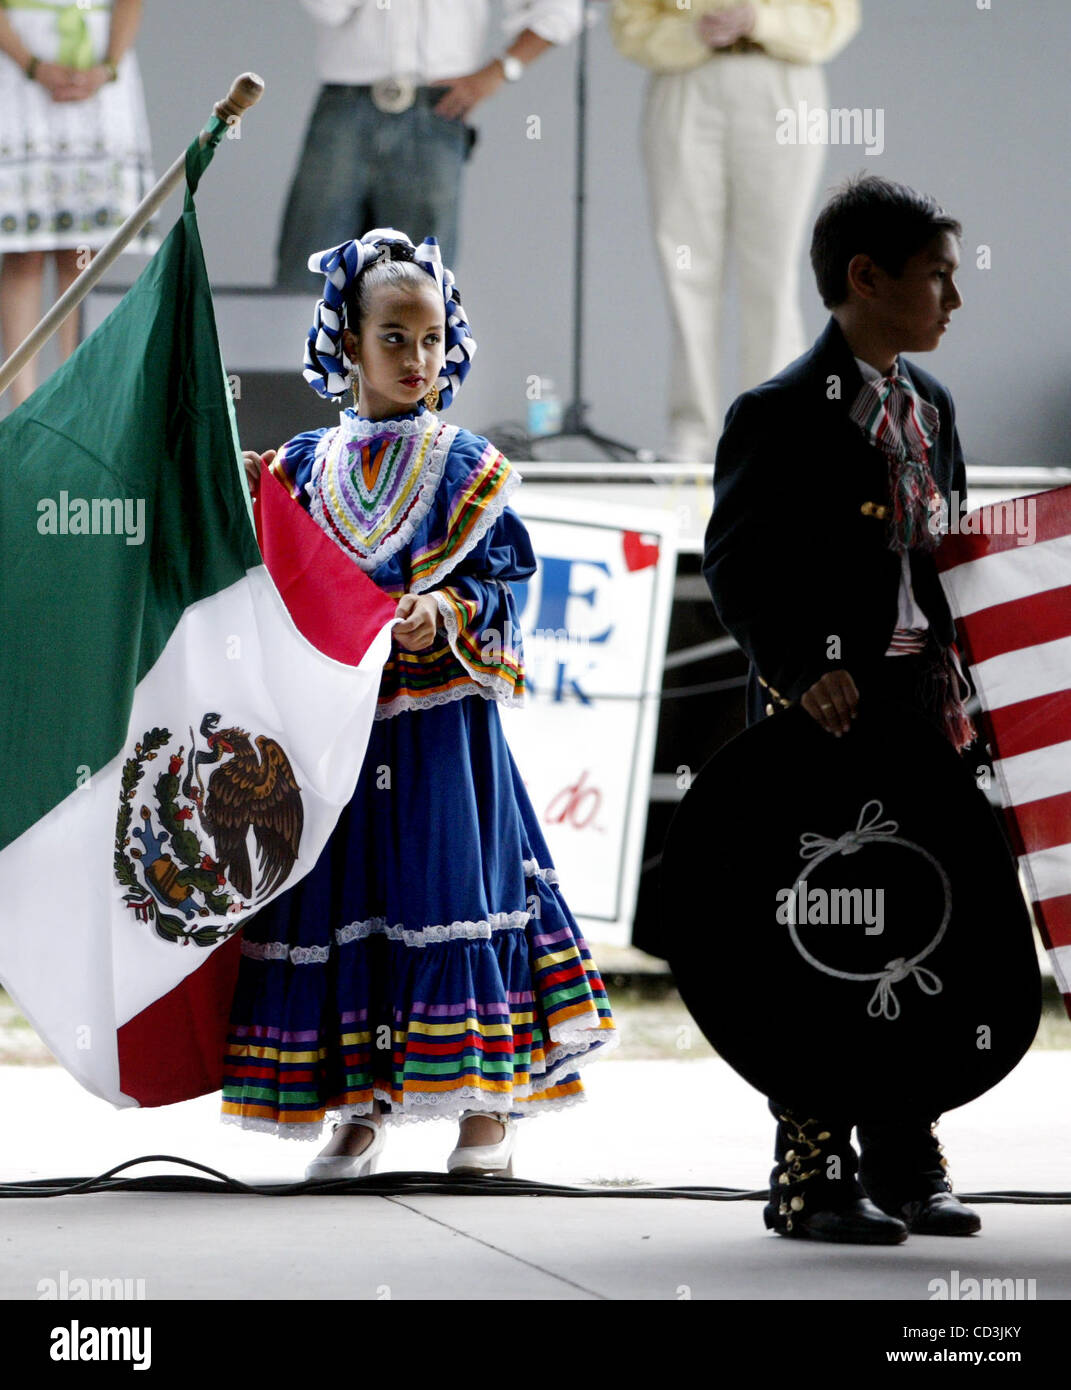 050408 tc met 1of5 cinco 0052514A Meghan McCarthy/The Palm Beach Post live for Fitzpatrick-Fort Pierce-Dressed in clothes from Mexico Coralys Colon, 9, left, and Branden Carrera 8, both of Fort Pierce, hold the flags of Mexico and the United States during the Cinco de Mayo celebration at the St. Luc Stock Photo